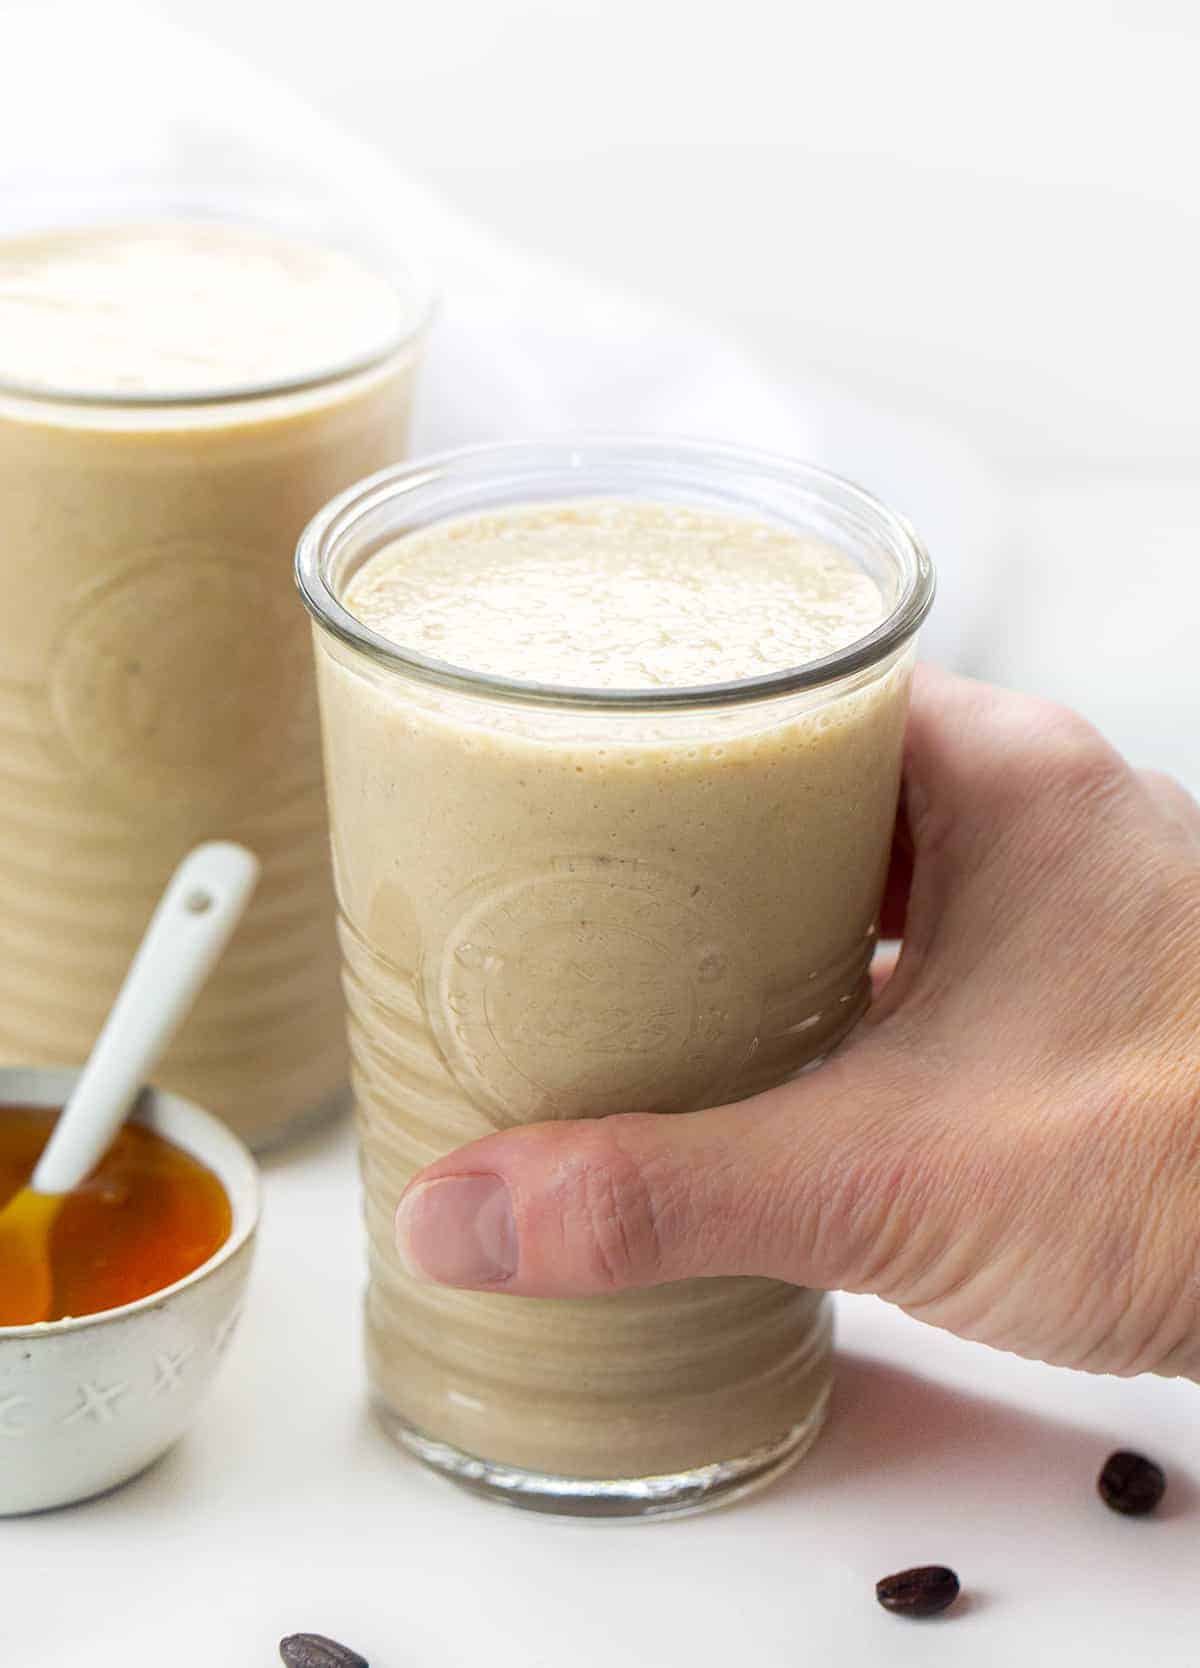 Hand Picking up a Glass Filled with Coffee Breakfast Smoothie - Good Morning Smoothie.